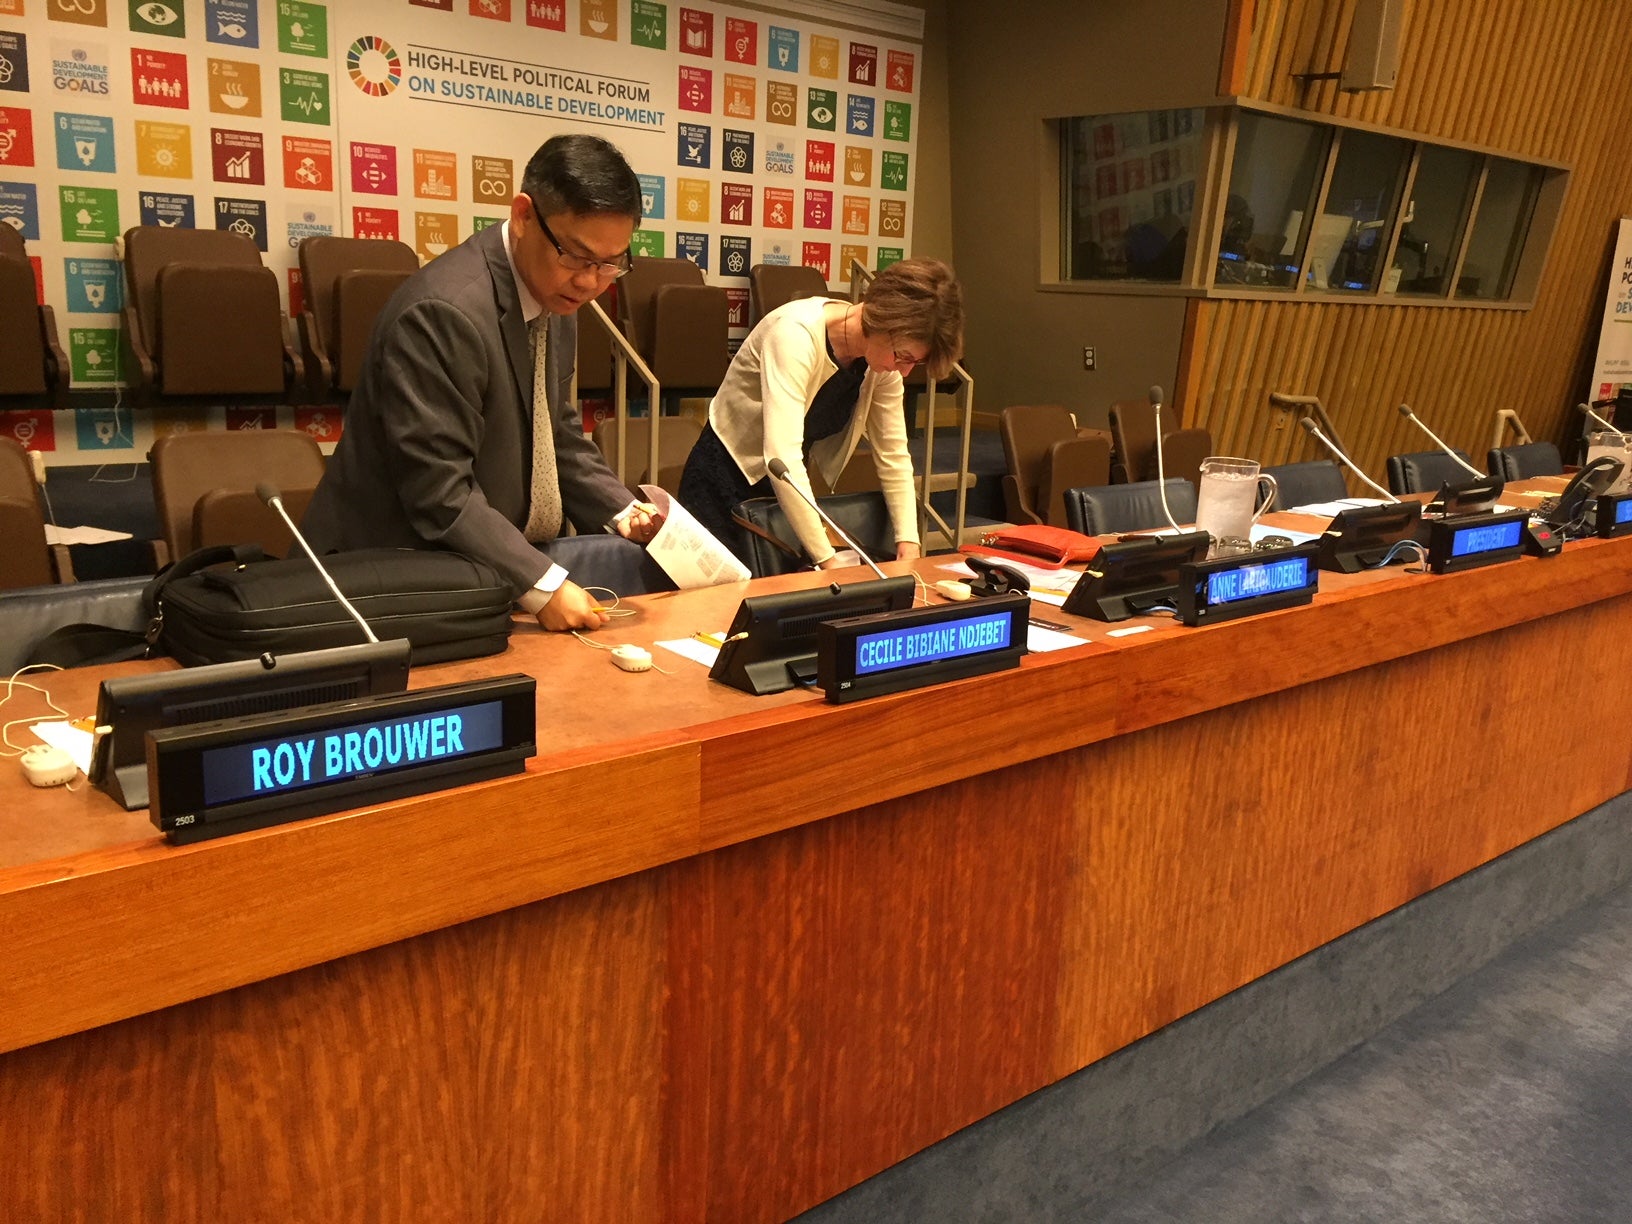 Roy Brouwer at United Nations High-Level Political Forum on Sustainable Development 